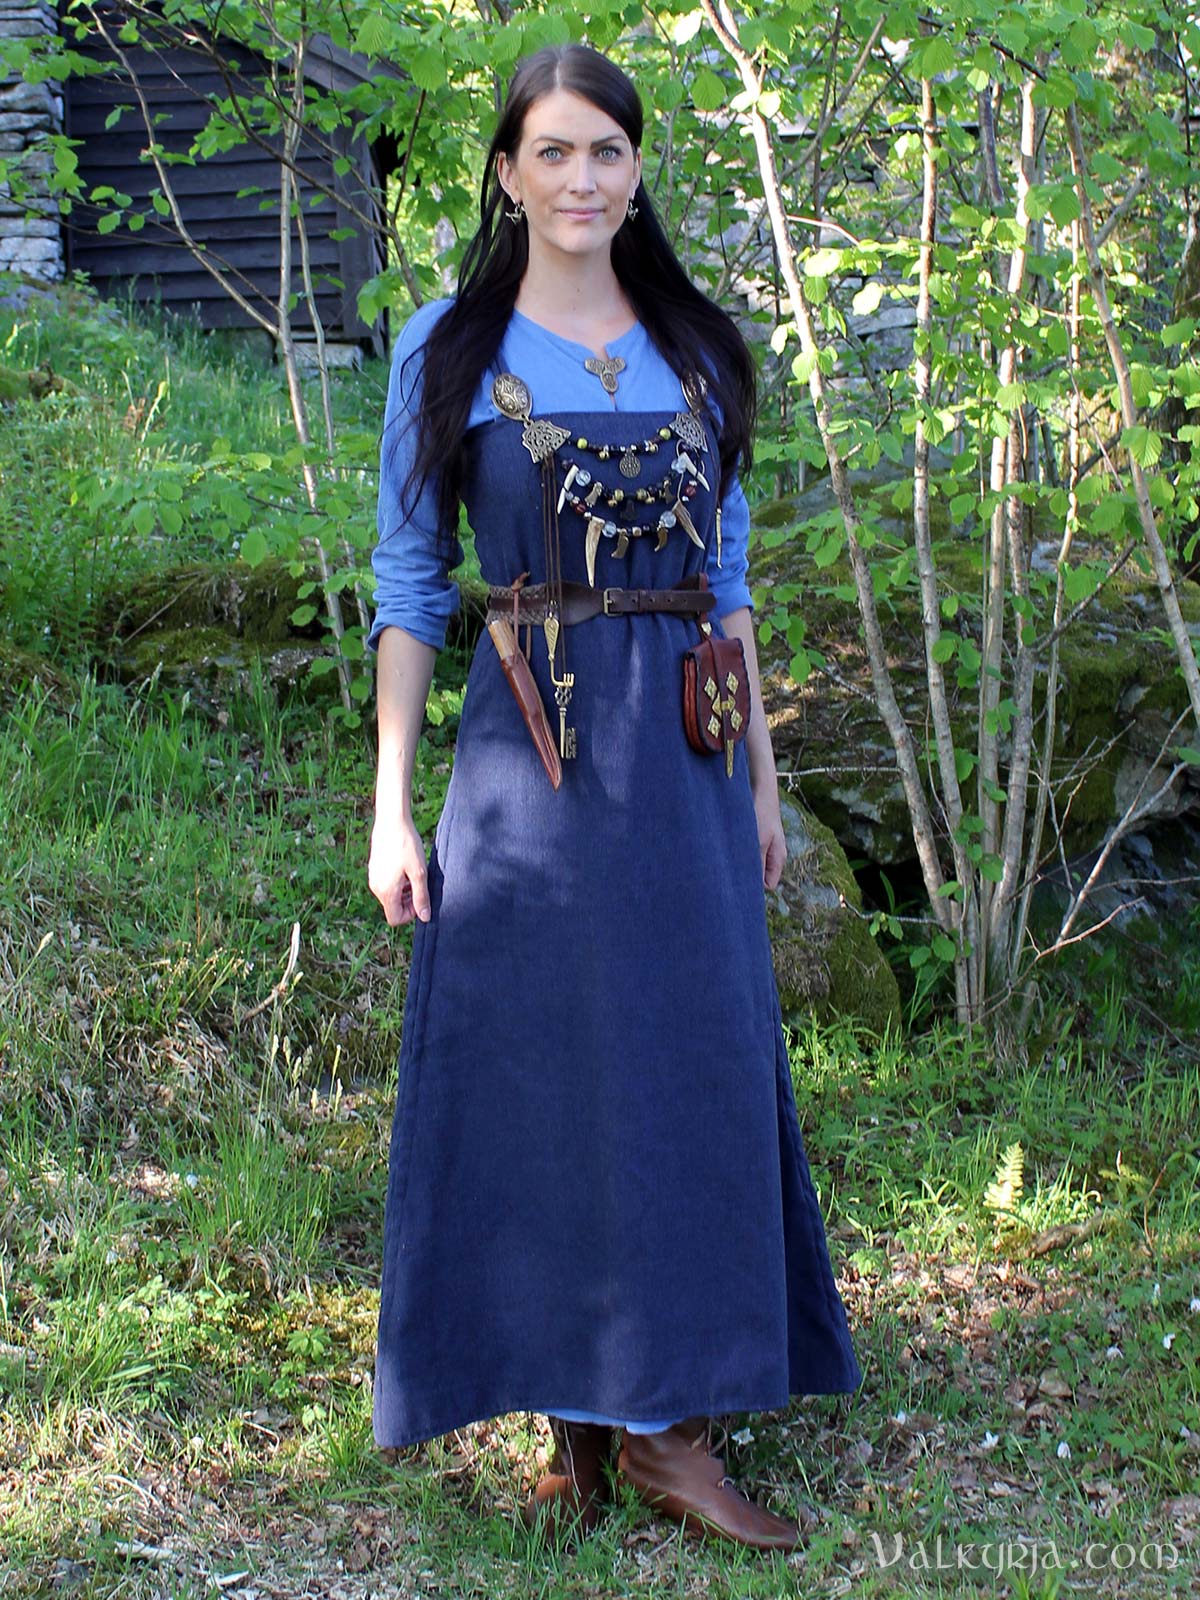 Valkyrja - Another aprondress (and shoes!) 🍃